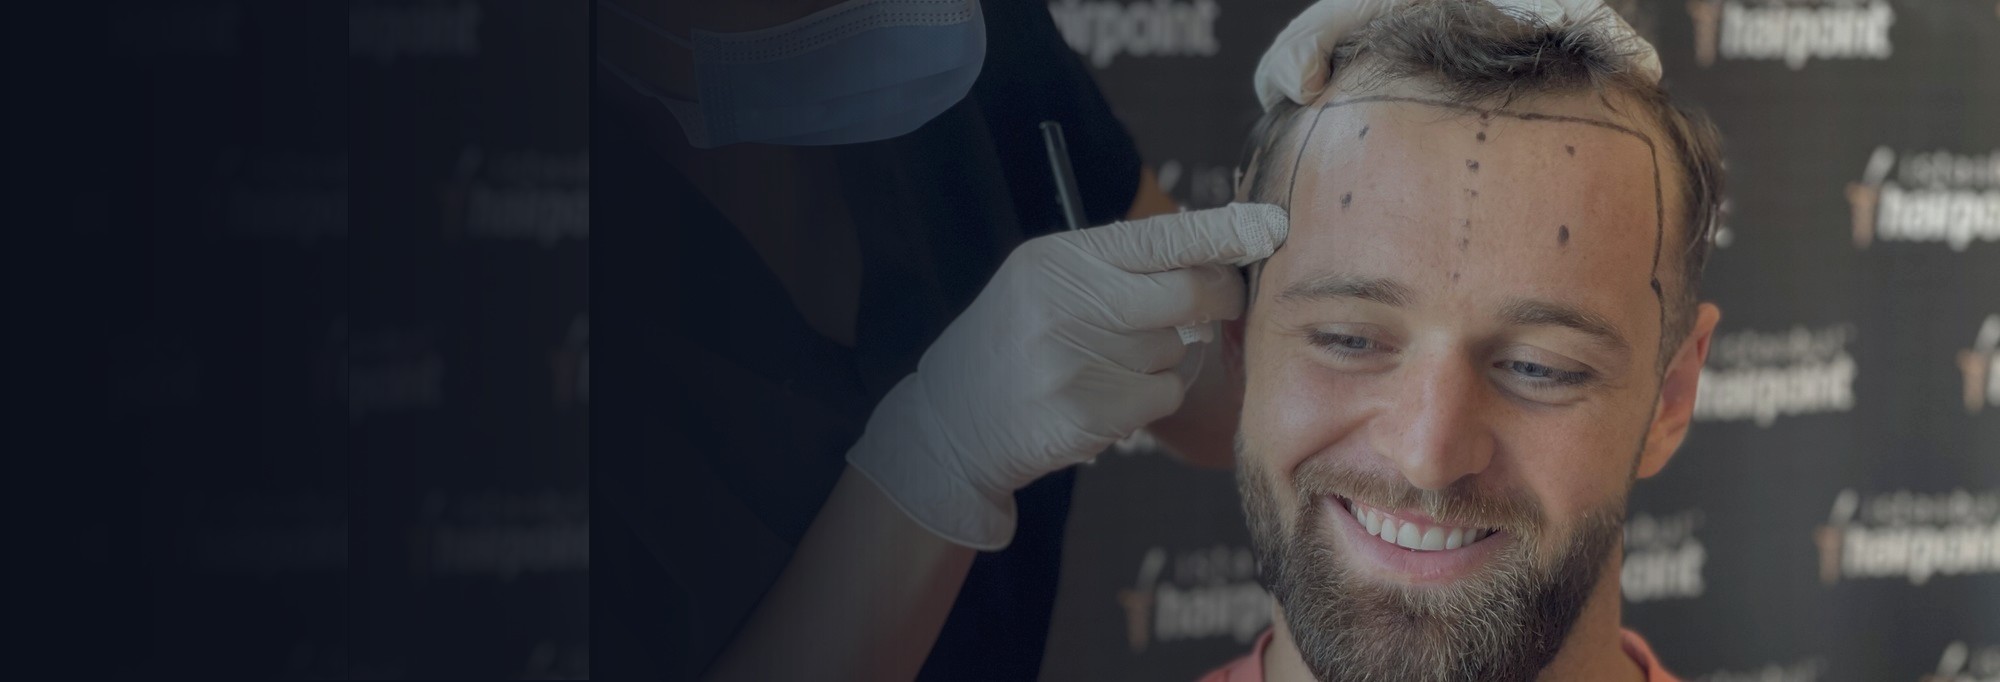 Get an offer for hair transplant at the leading hair transplant center in Turkey and Europe